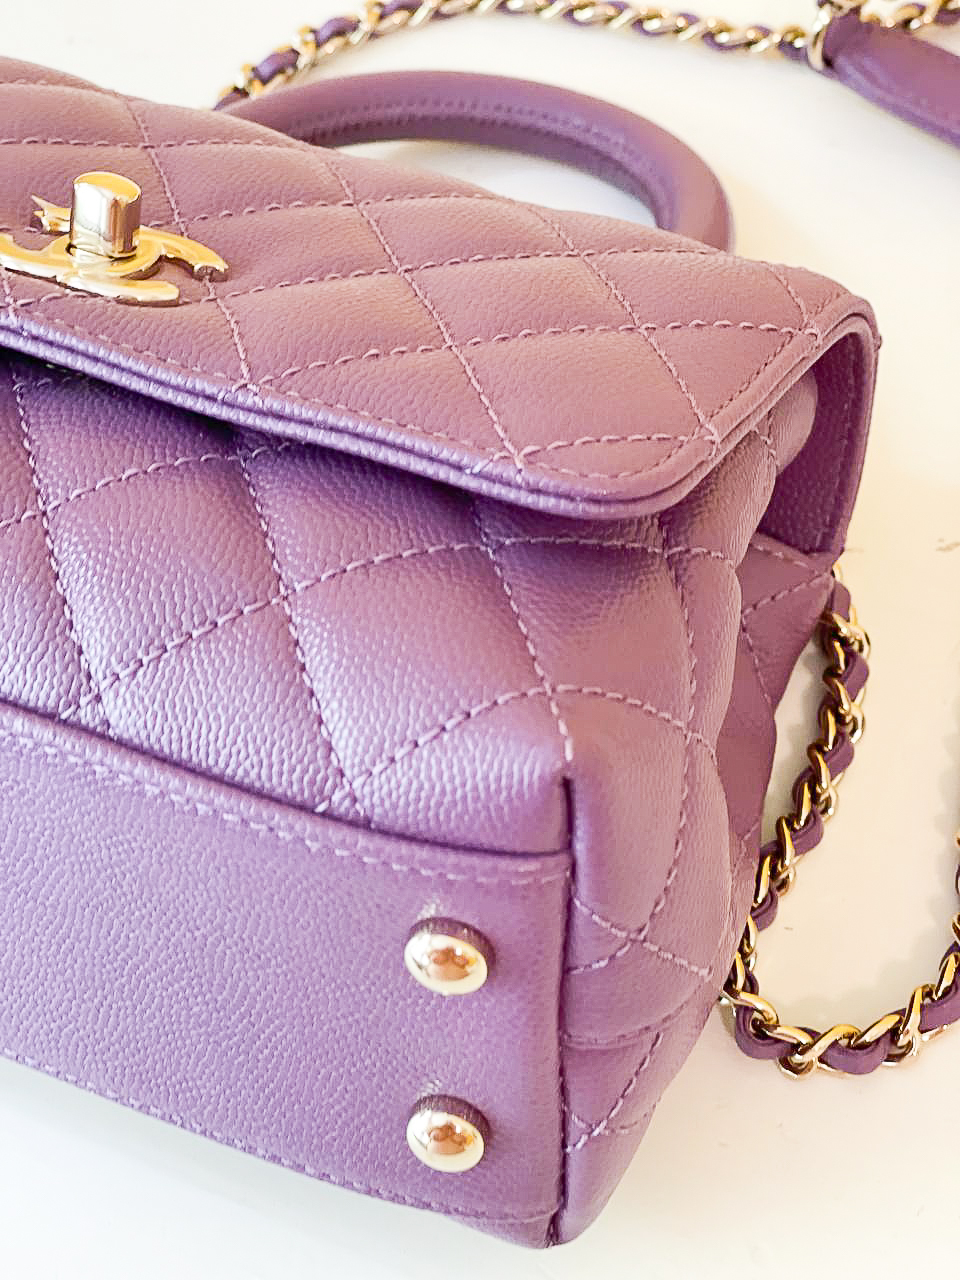 Chanel Coco Handle Extra Mini, Purple Caviar Leather with Gold Hardware,  New in Box (Ship from London)